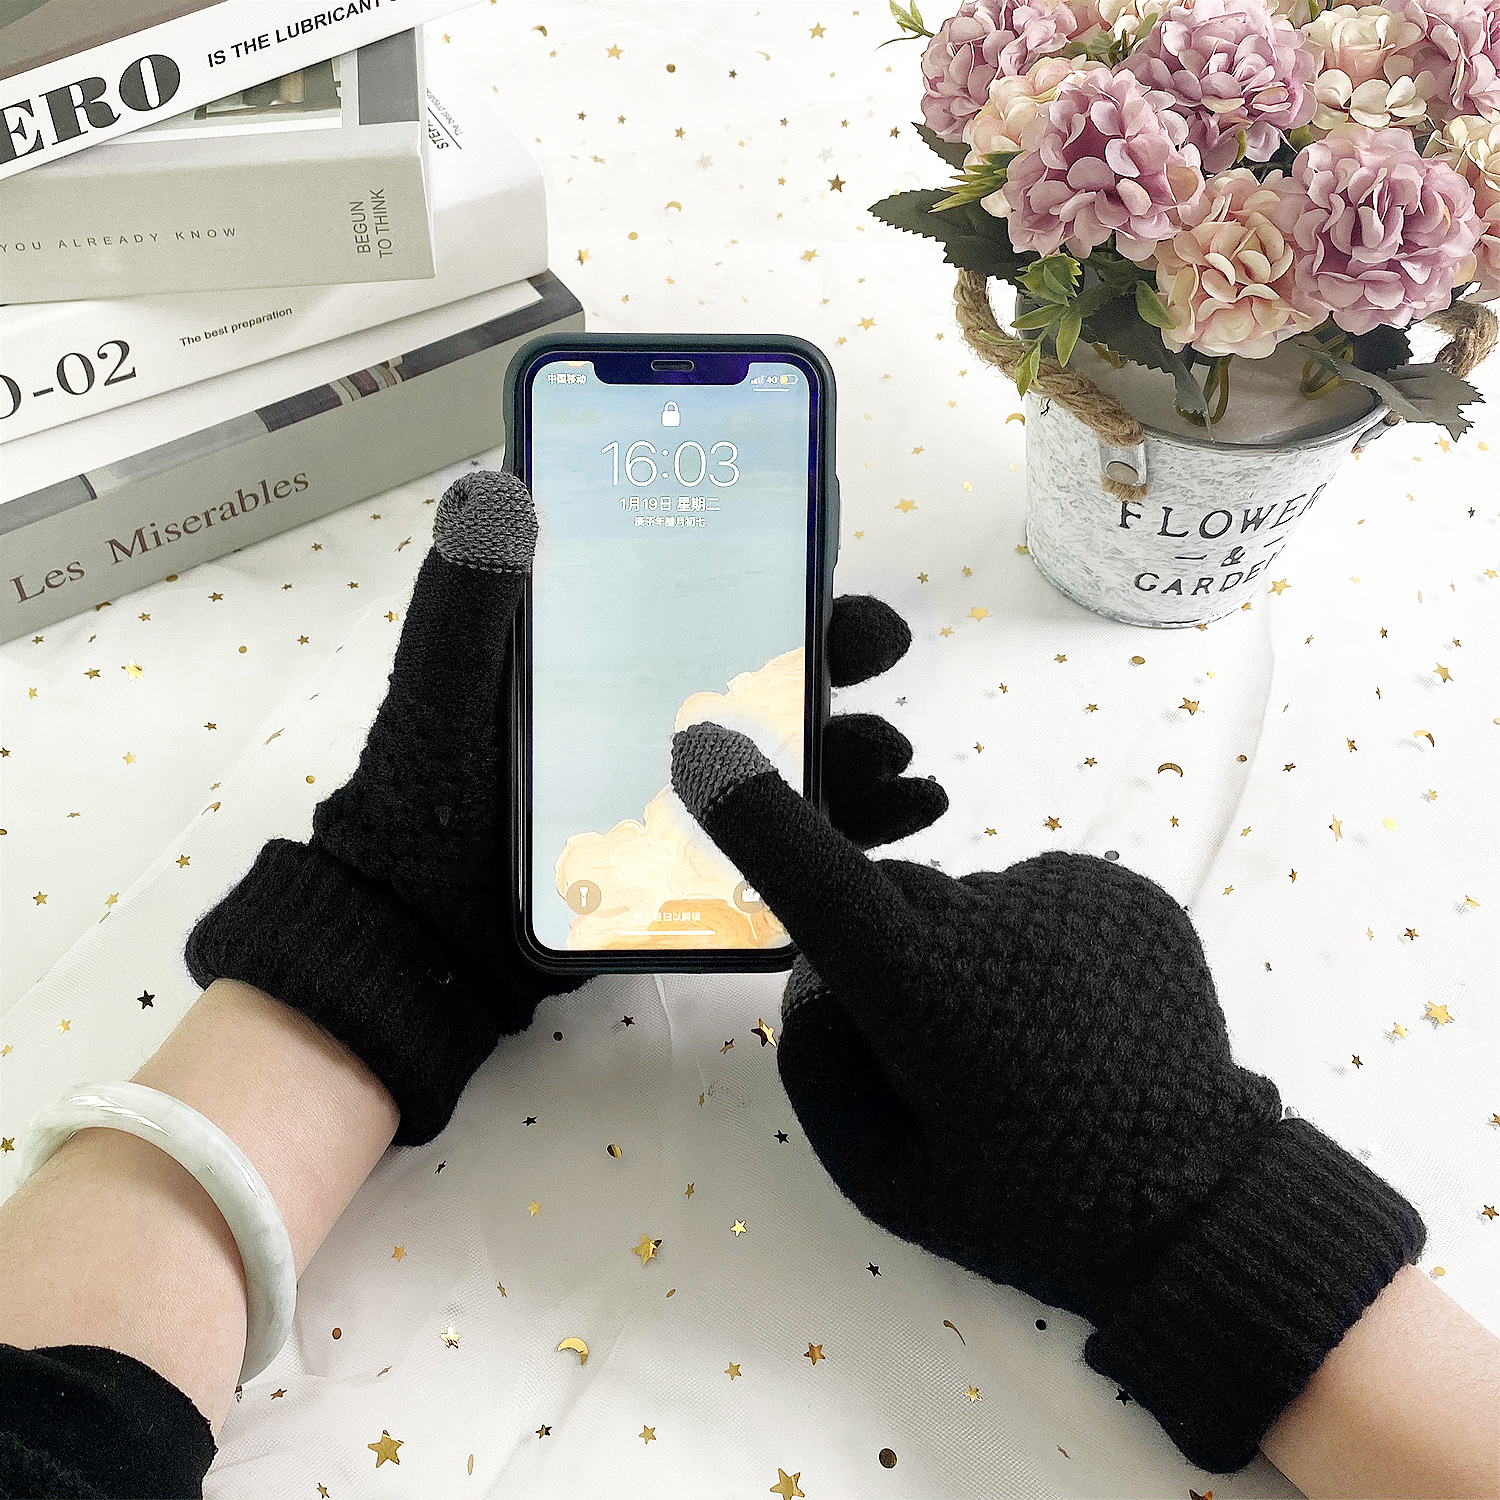 (New Year Sale-48% OFF) Women's Winter Touch Screen Gloves-Buy 3 Get Extra 10% OFF